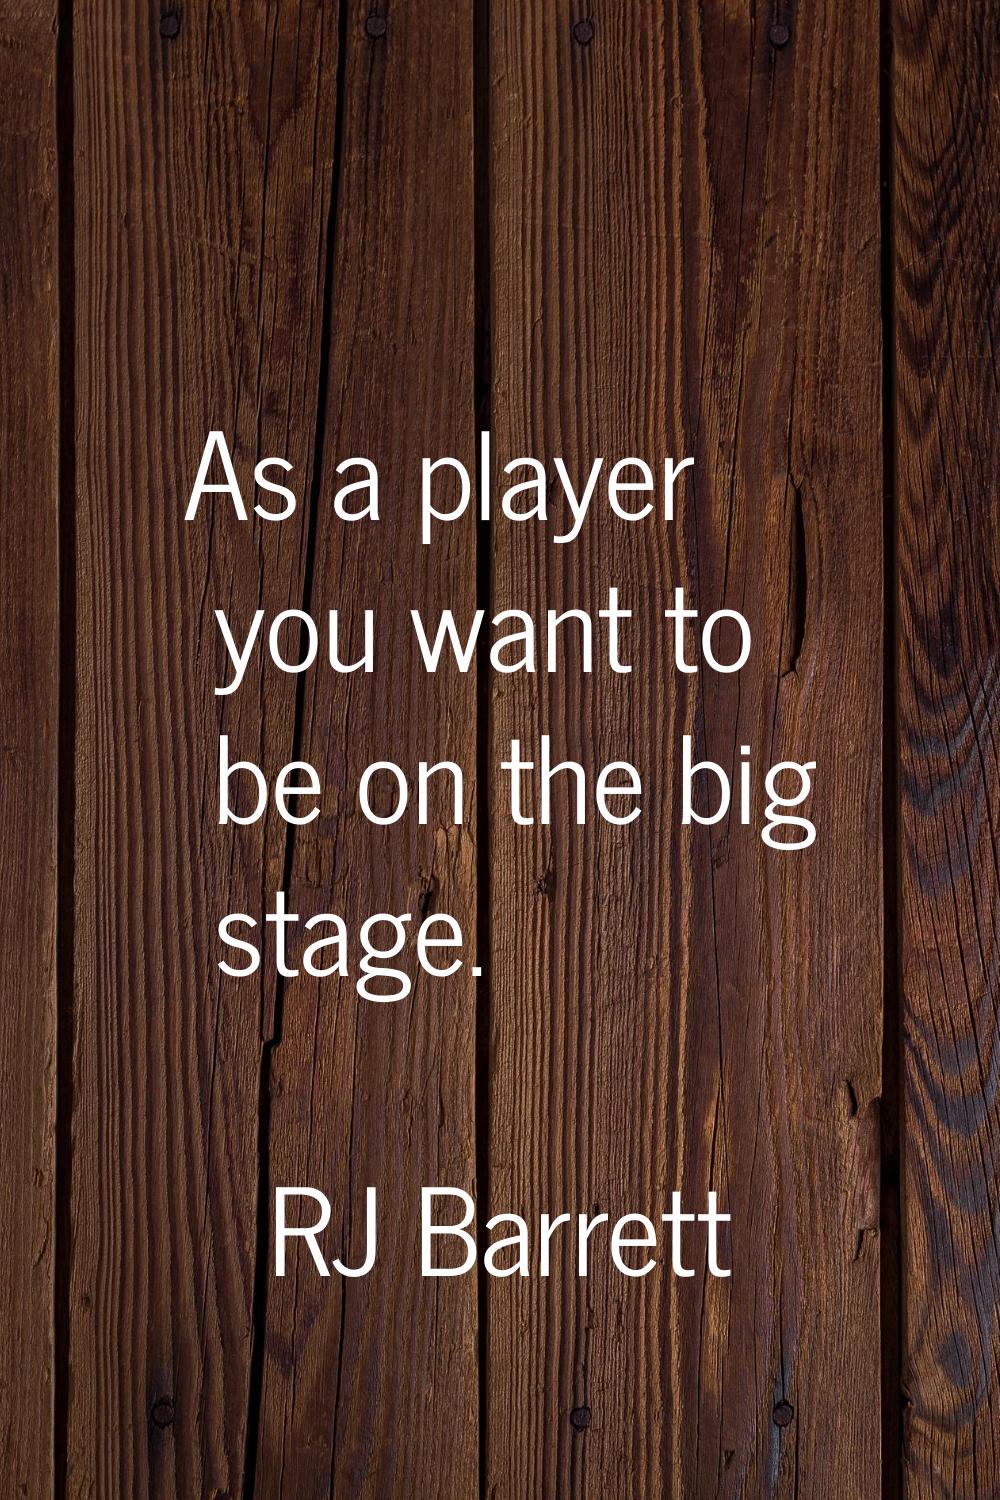 As a player you want to be on the big stage.